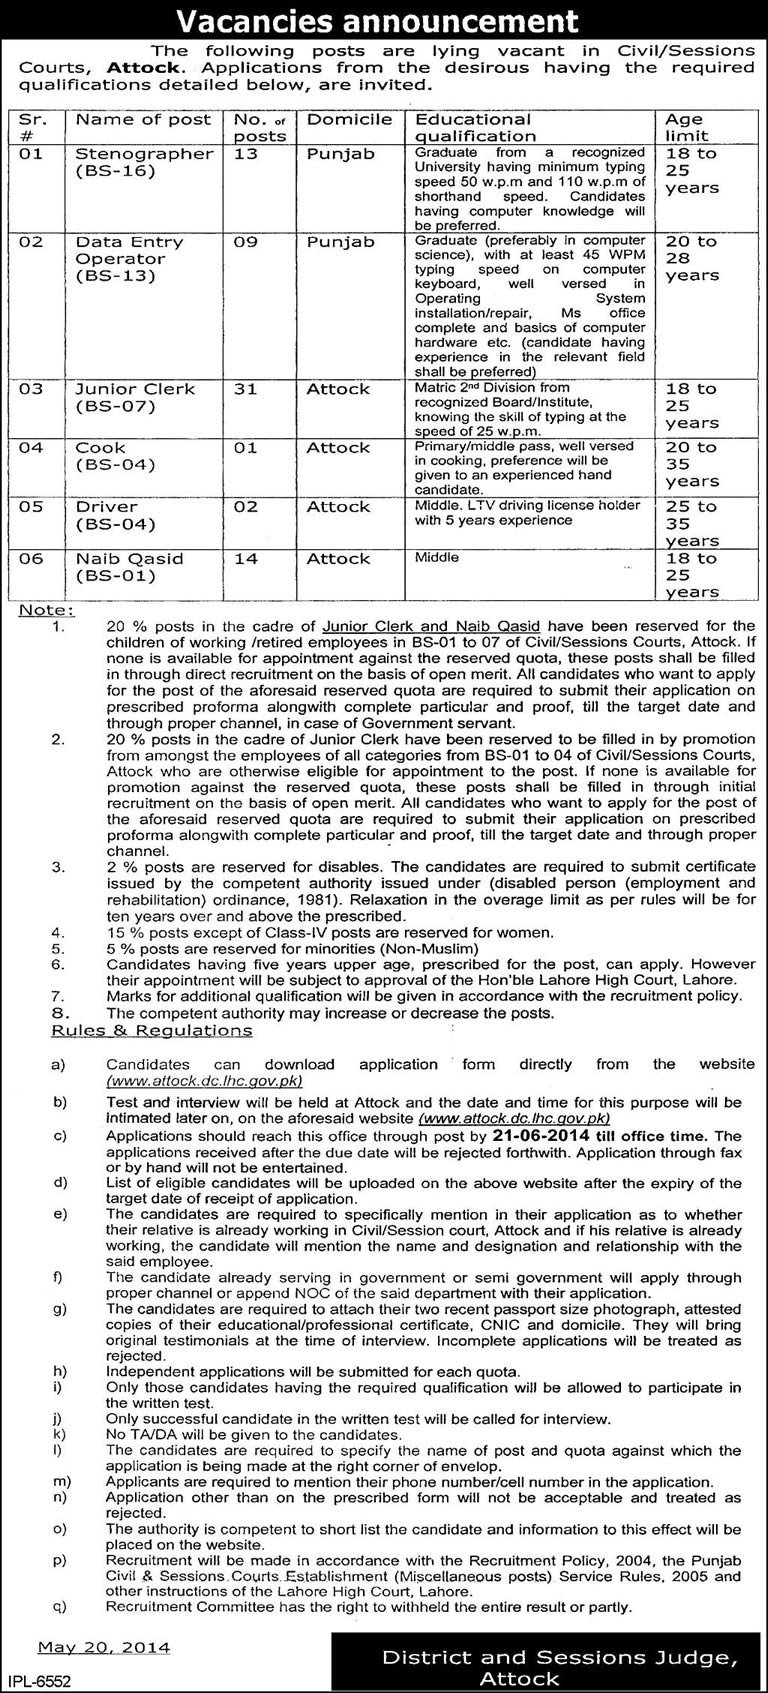 Civil / Session Court Attock Jobs 2014 May Junior Clerks, Stenographers, Data Entry Operators & Others